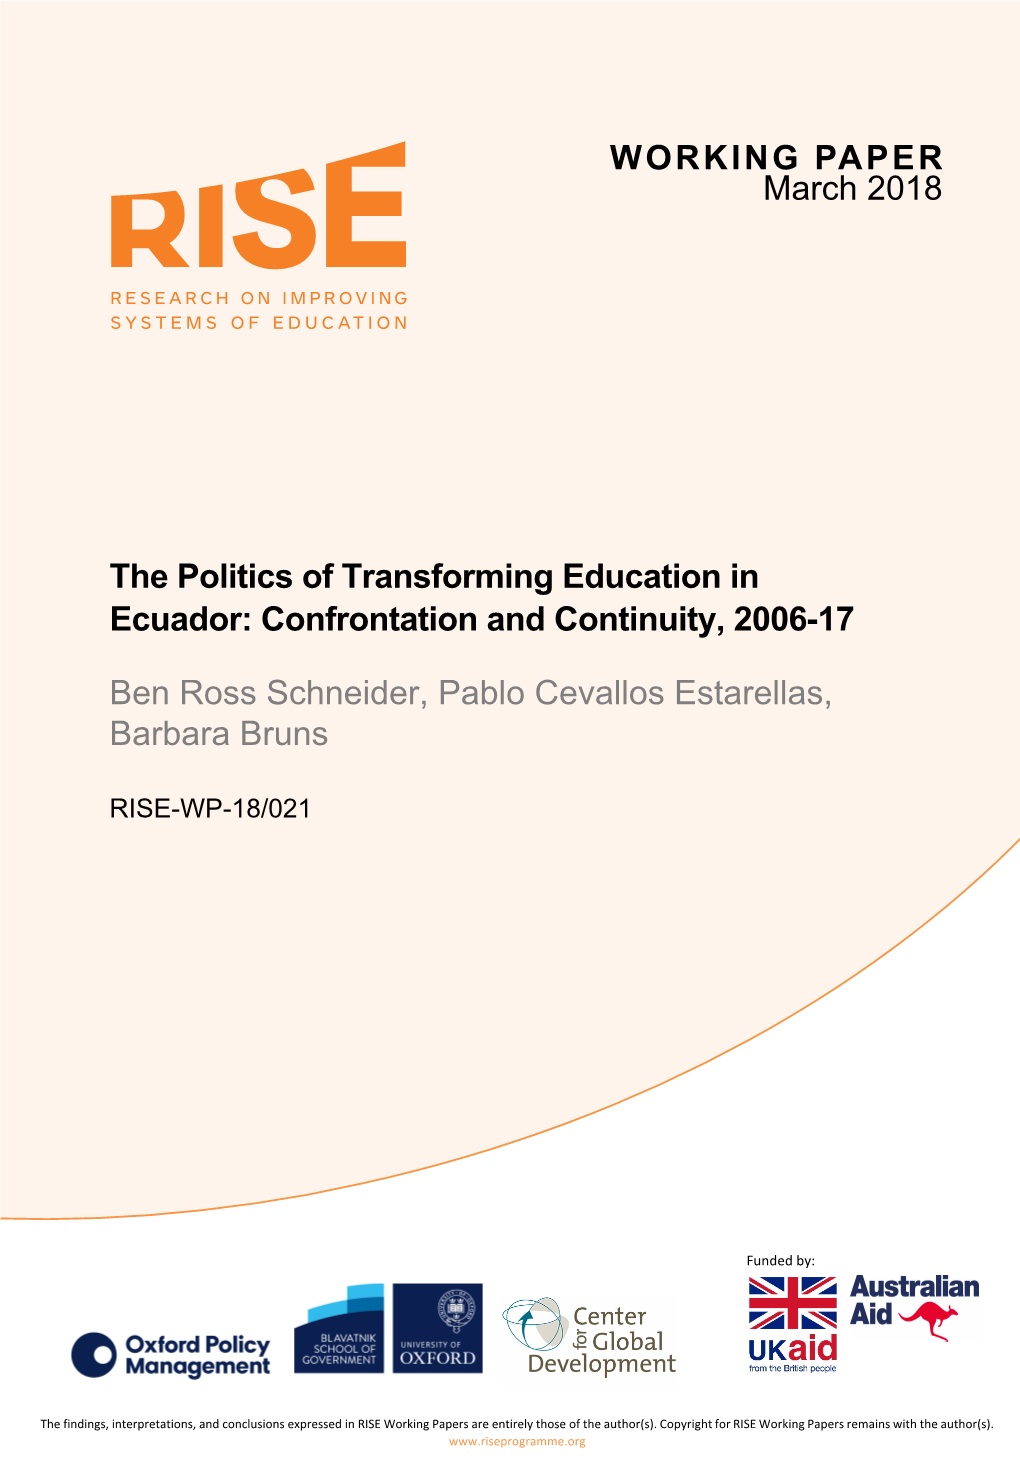 The Politics of Transforming Education in Ecuador: Confrontation and Continuity, 2006-17